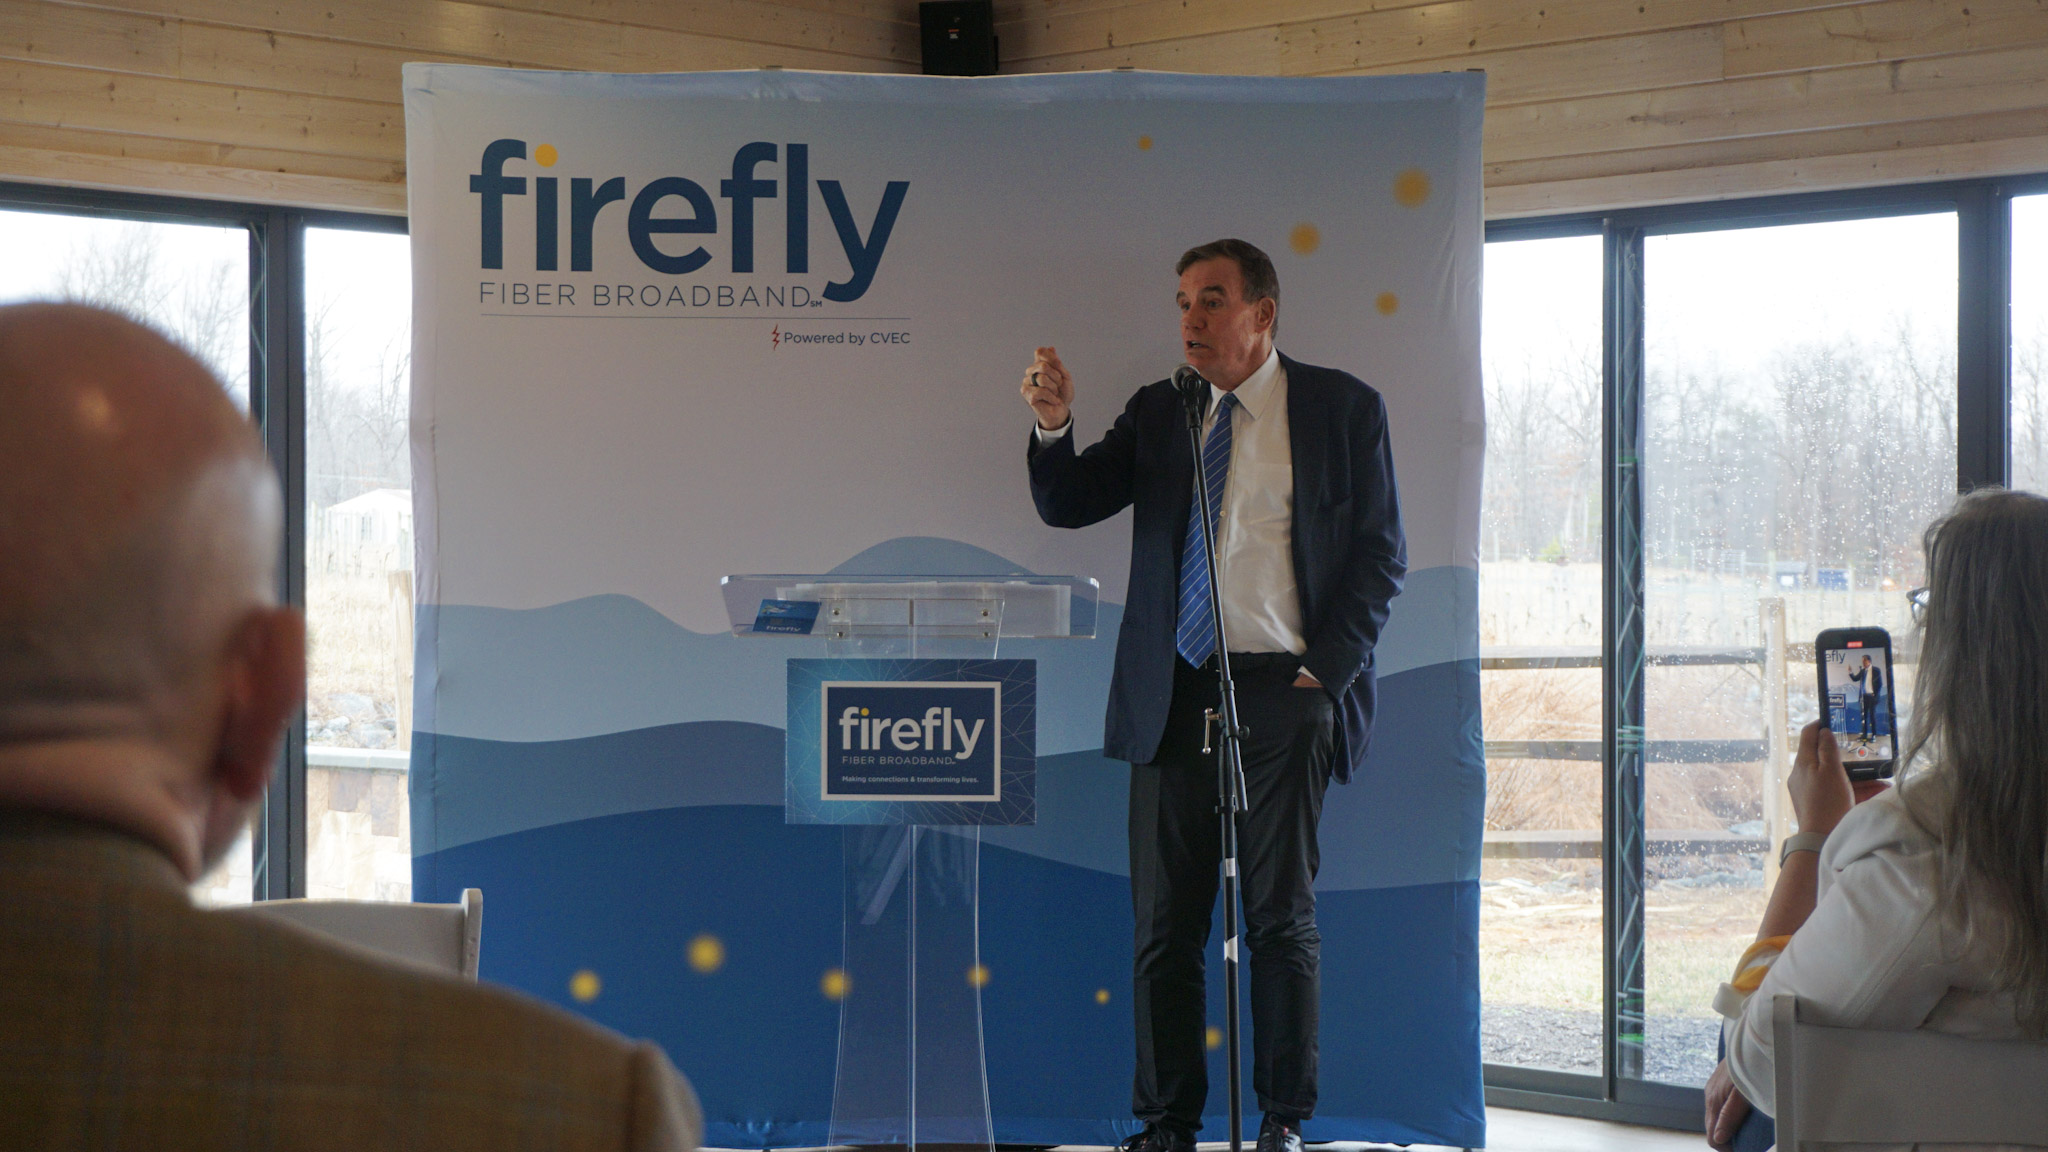 Featured image for “Firefly Brings “Speed of Light” to Rural Louisa County: Broadband Installation to be Complete by 2025”